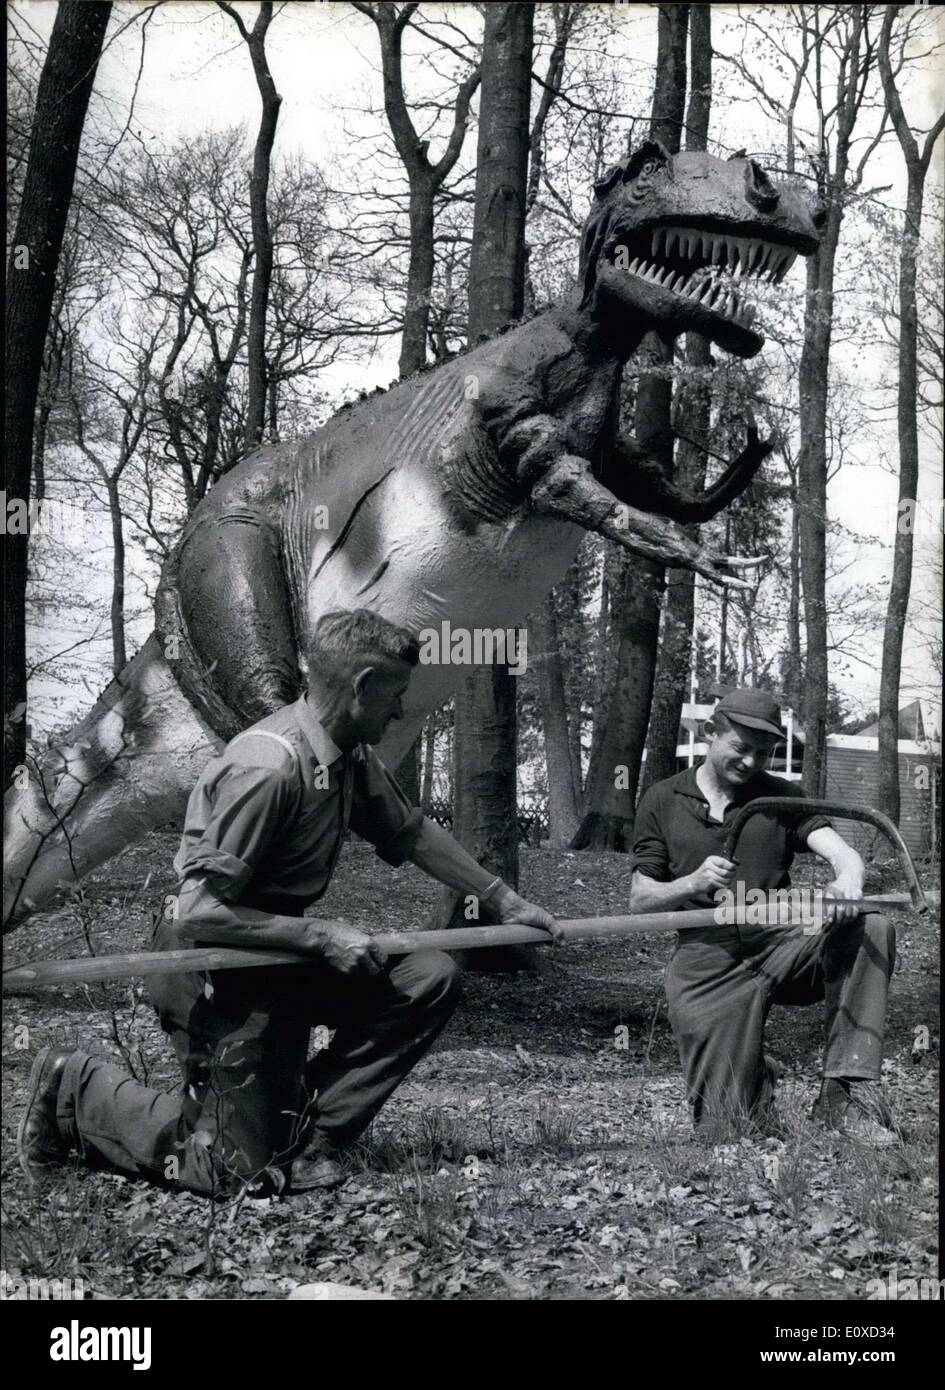 Apr. 28, 1966 - These workers are in no danger from the behemoth behind them. The dinosaur is part of a ''mythical'' garden near Wiesbaden that is somewhat like Disney Land, which planned to open on 5-12-1966. A print owner had the idea to create it. They wanted to entertain little kids. The figures are made true-to-life and are colorful. Each figure has an audio recording to tell ''their'' tells. Stock Photo